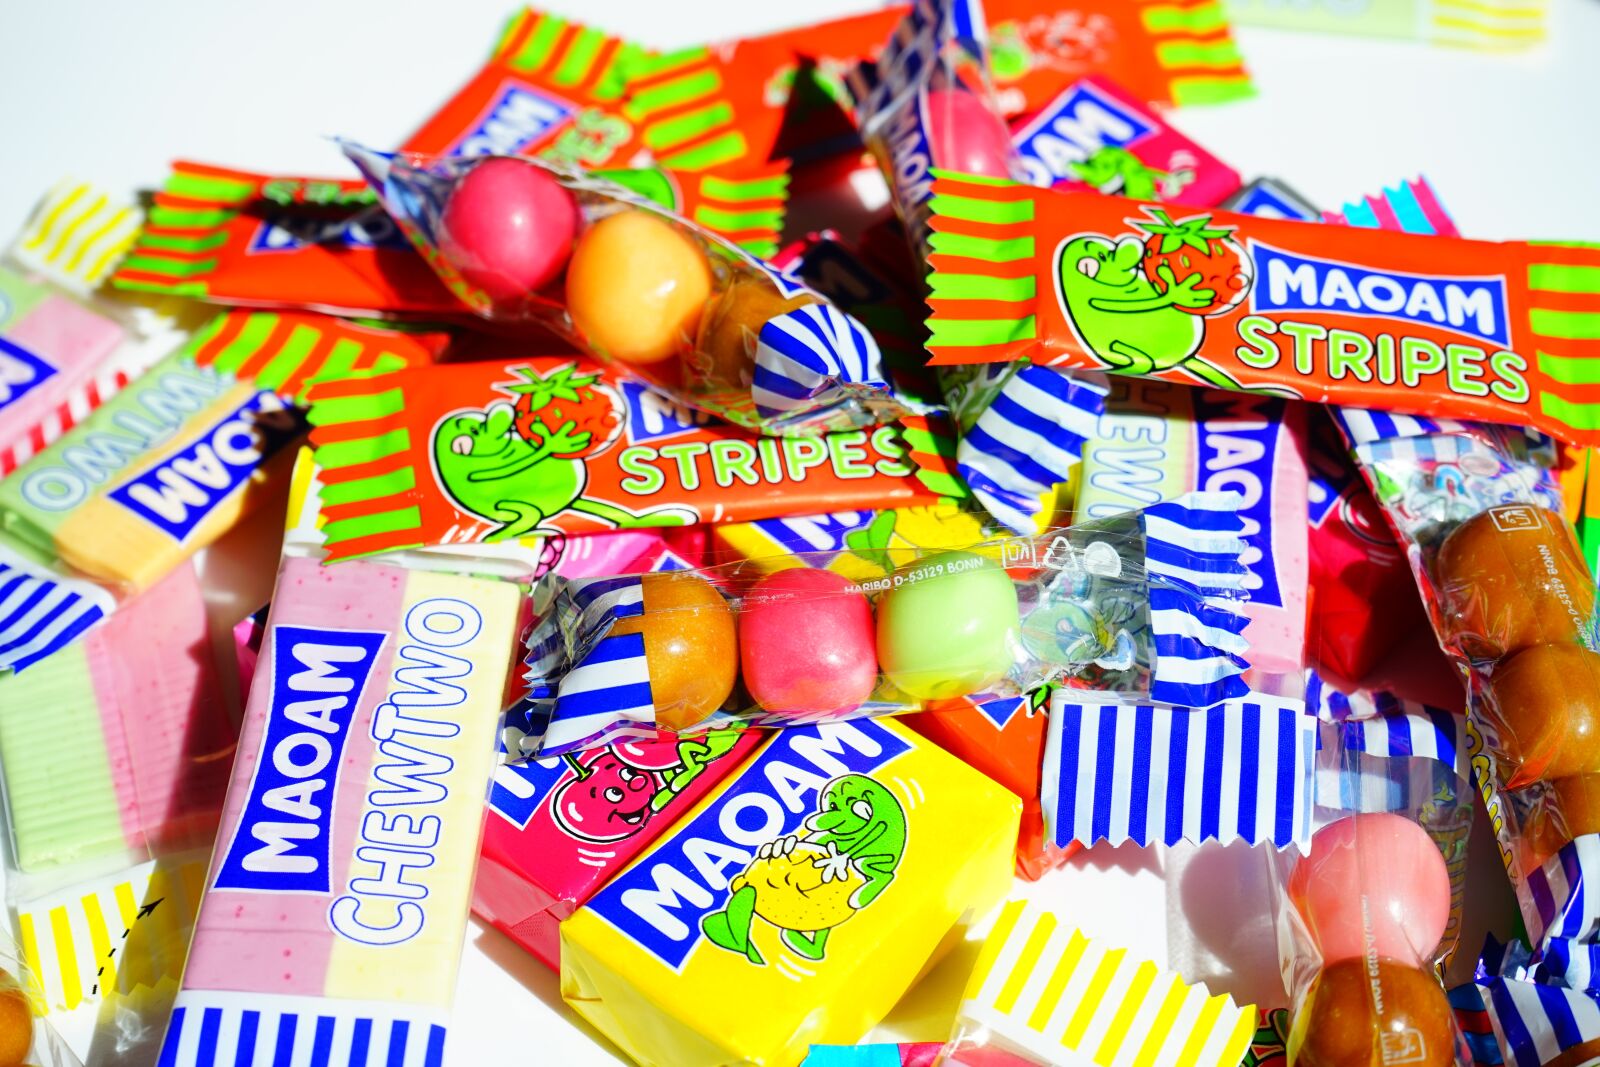 Sony a7 sample photo. Maoam, chewy candy, sweetness photography